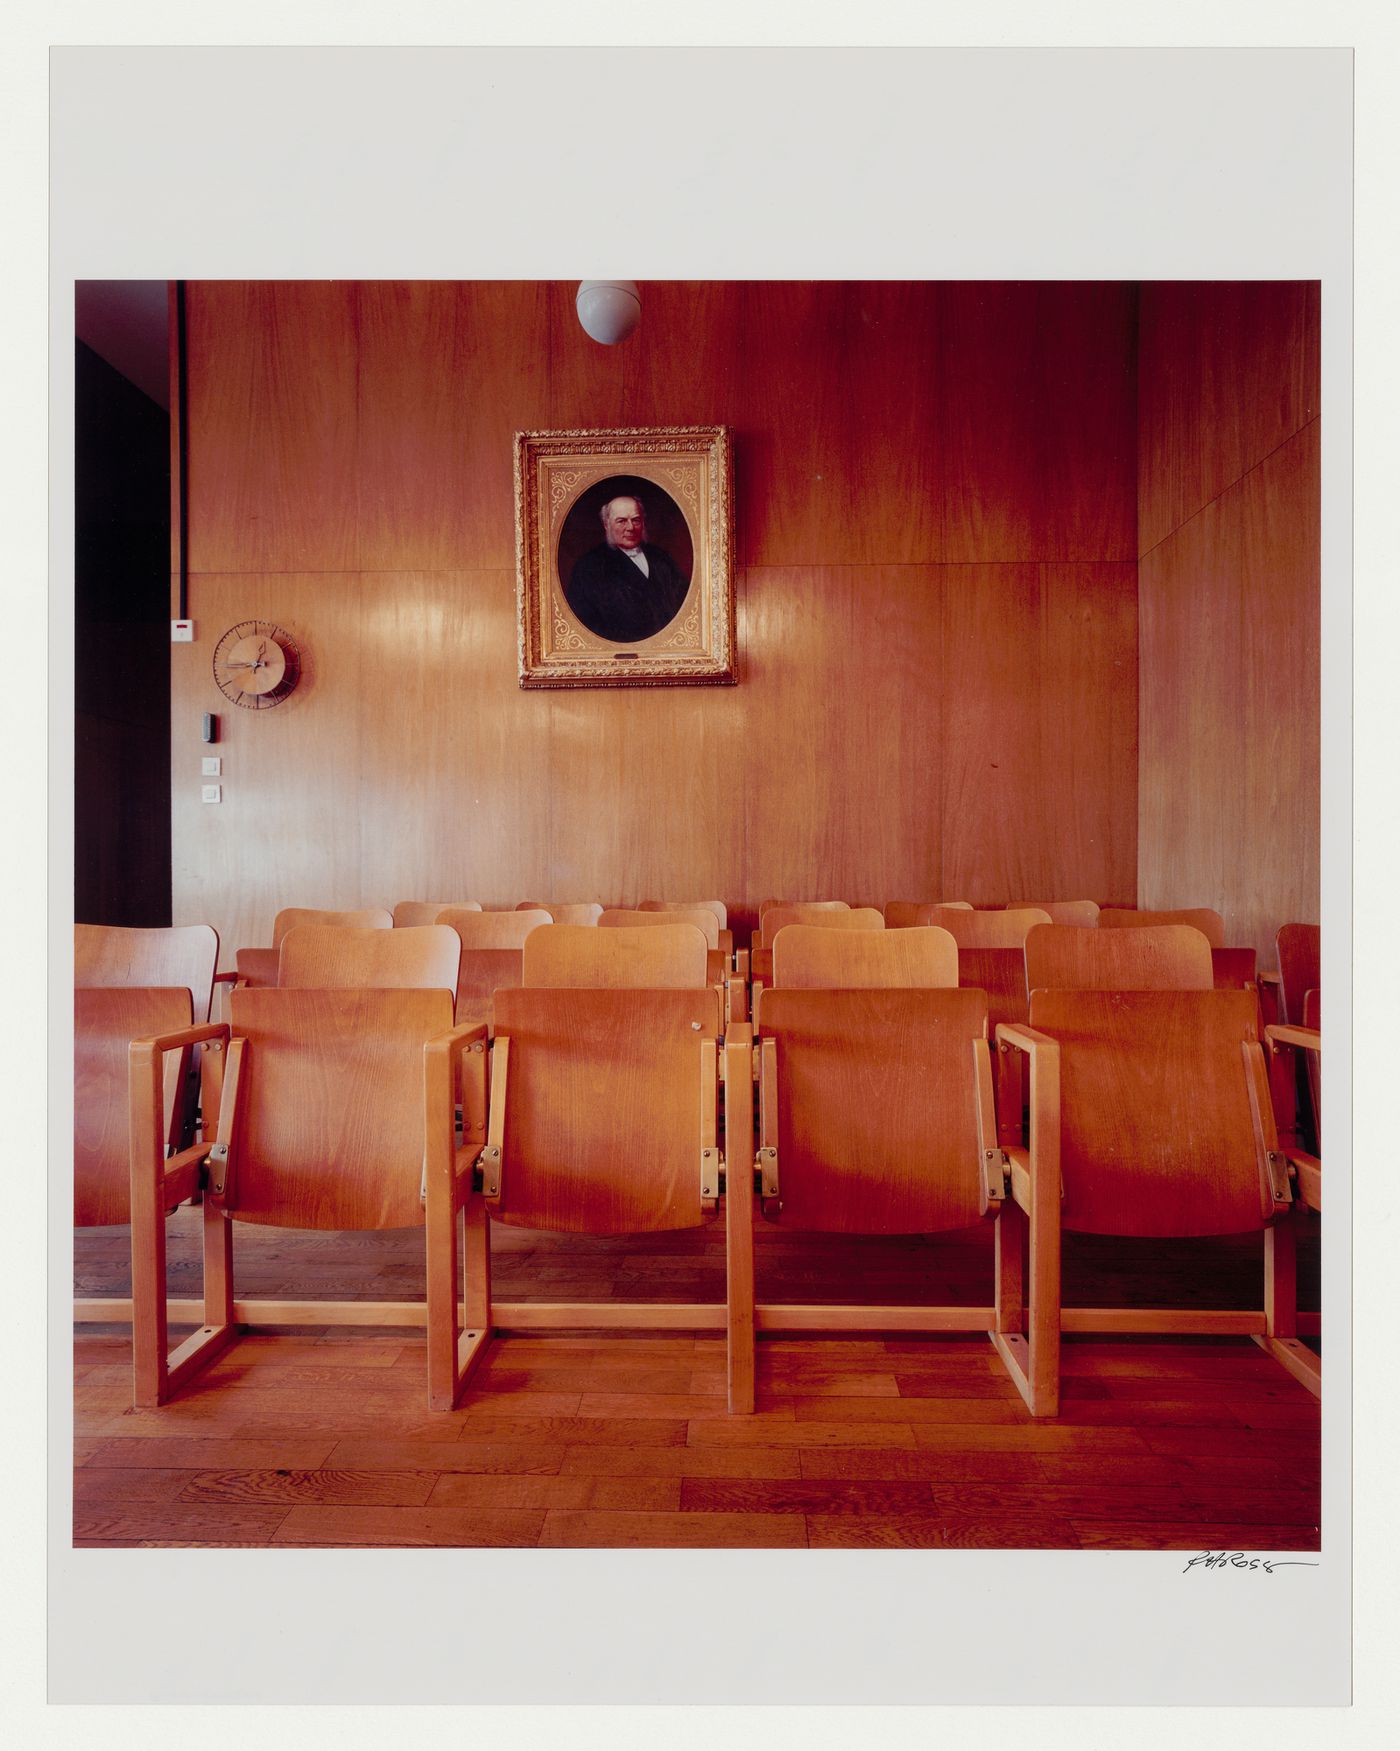 Interior view of the courtroom  with chairs in the foreground and a framed portrait painting hanging in the background, Göteborgs rådhusets tillbyggnad [courthouse annex], Göteborg, Sweden